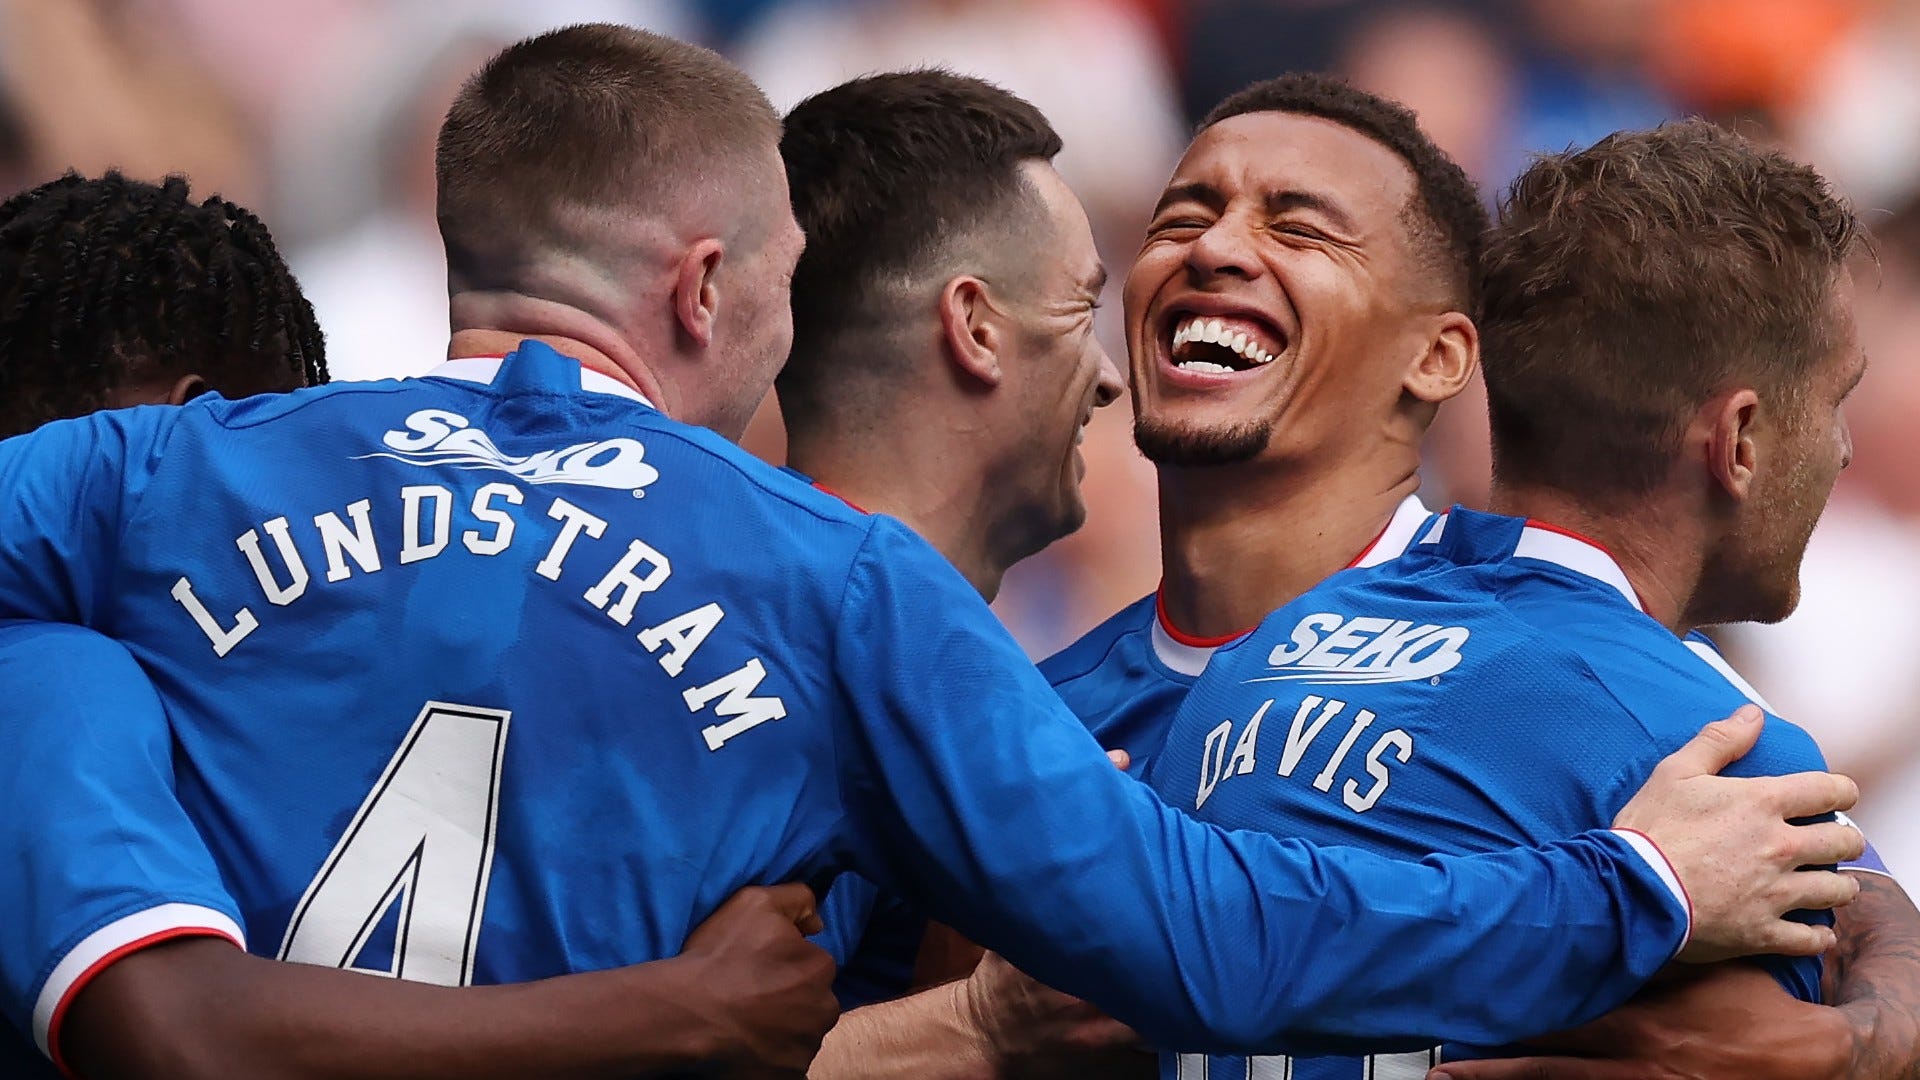 Rangers vs Queen of the South Live stream, TV channel, kick-off time and how to watch Goal